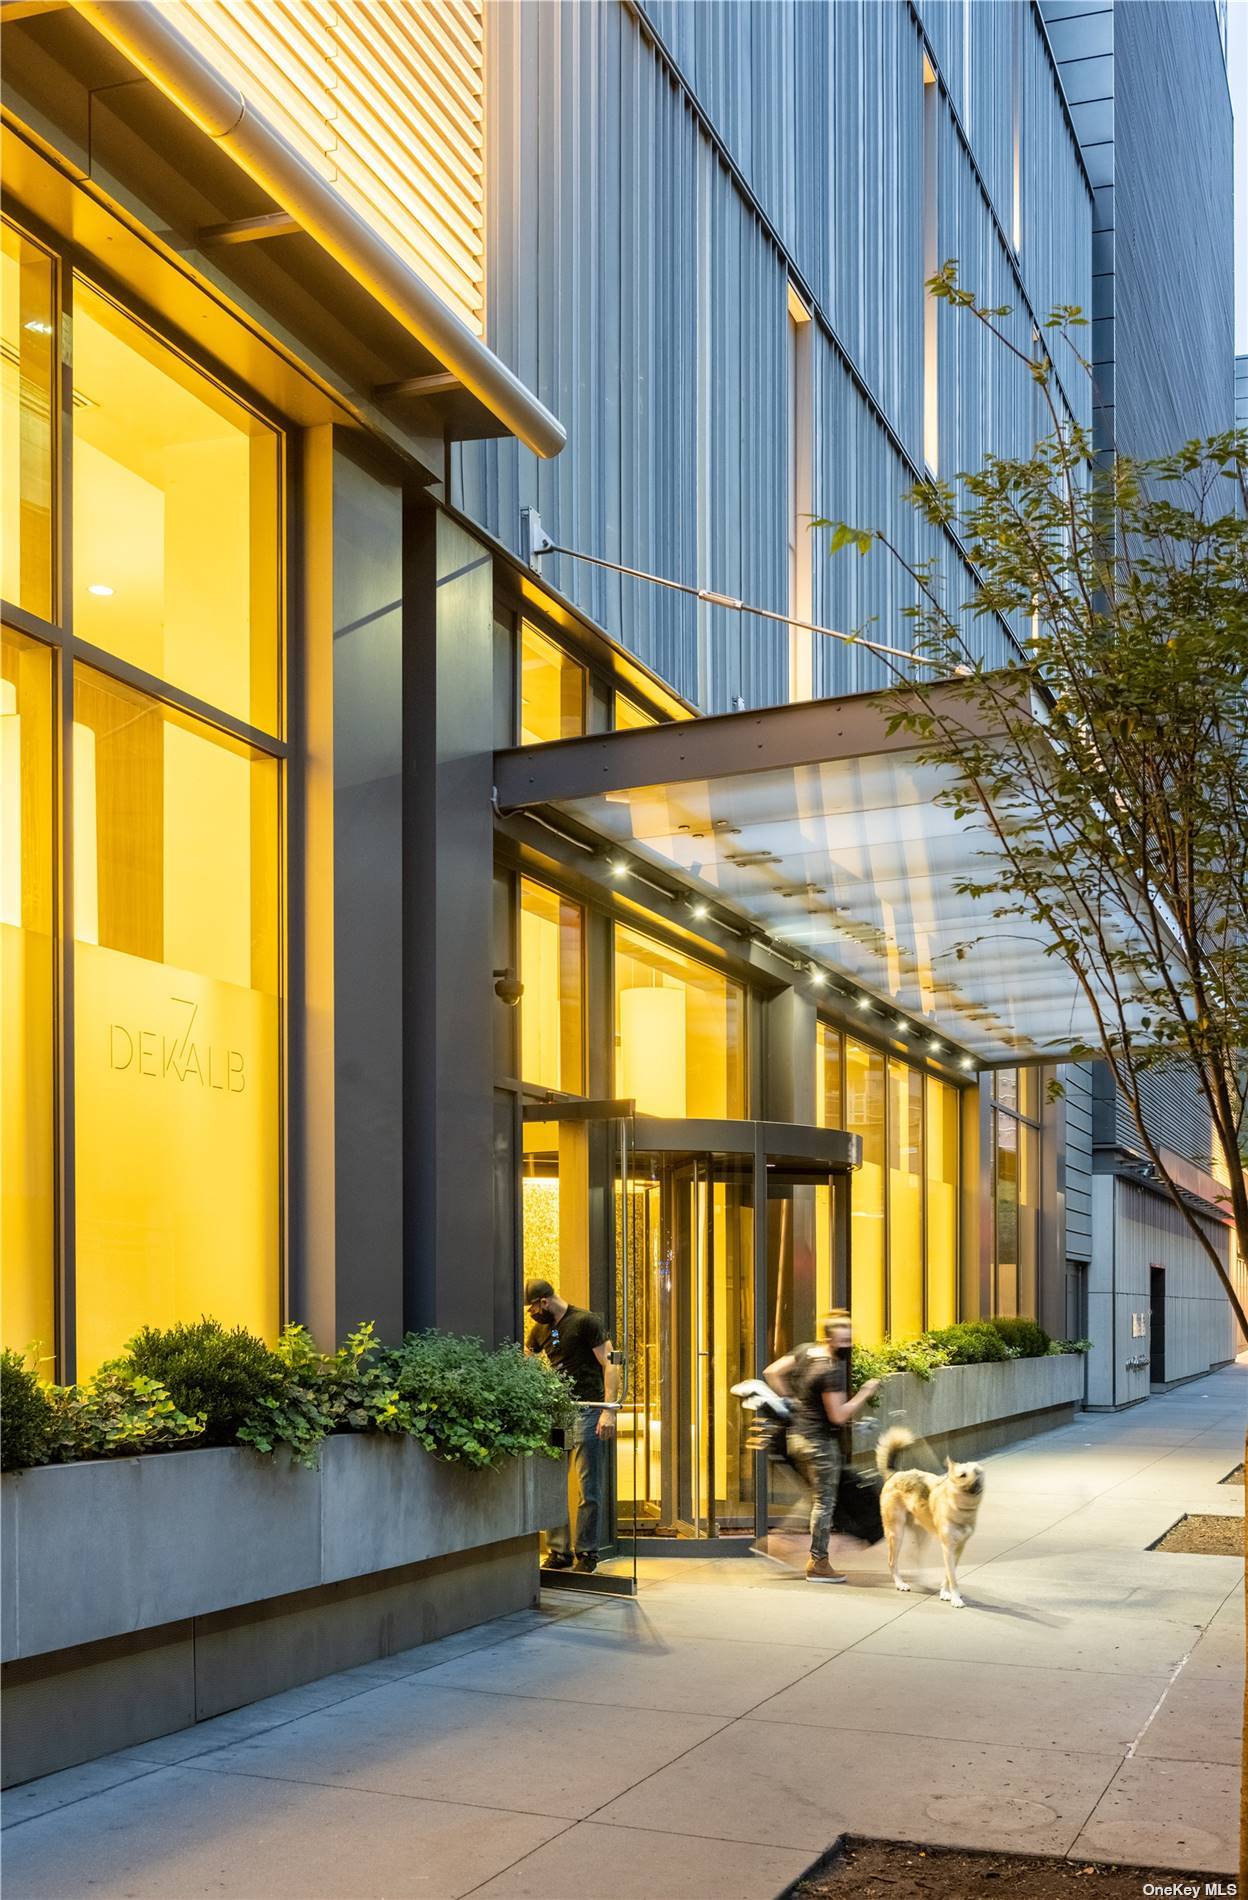 Nestled in the heart of vibrant Downtown Brooklyn, the building's meticulously styled grounds offer you the perfect blend of convenience and comfort.